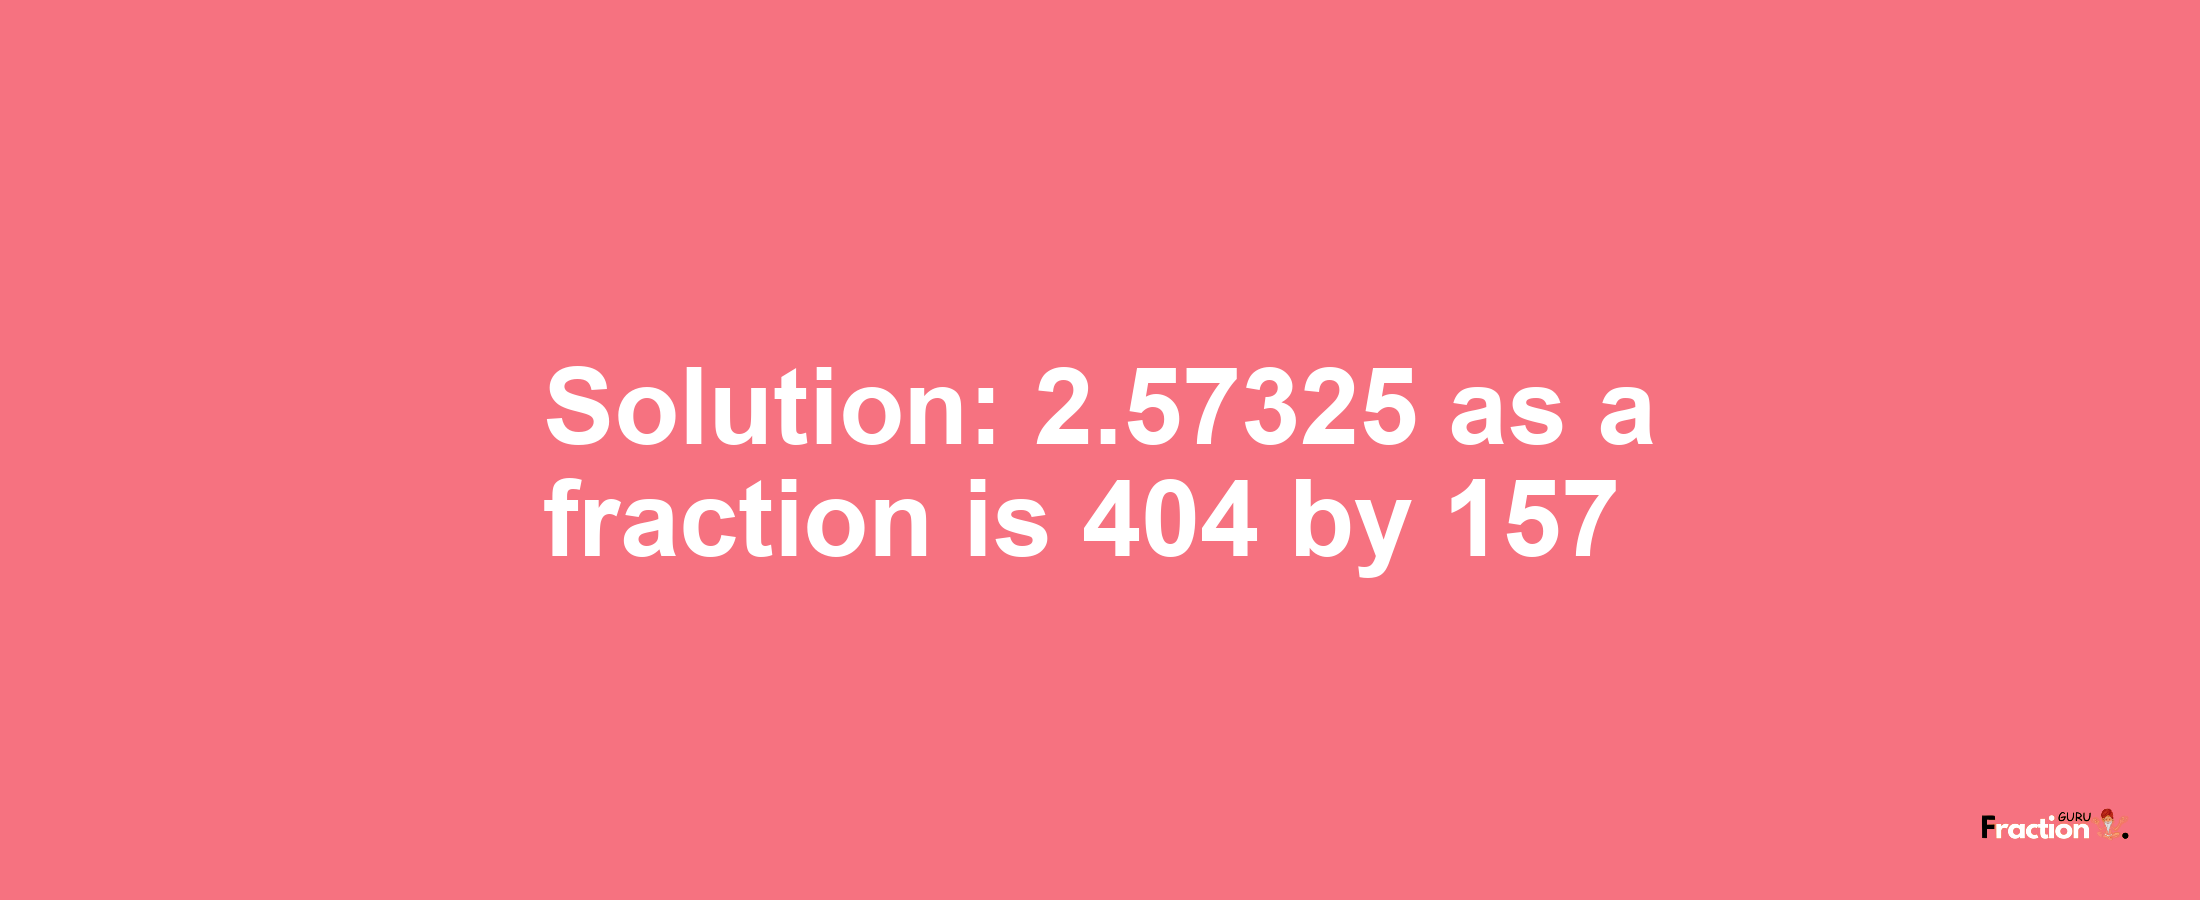 Solution:2.57325 as a fraction is 404/157